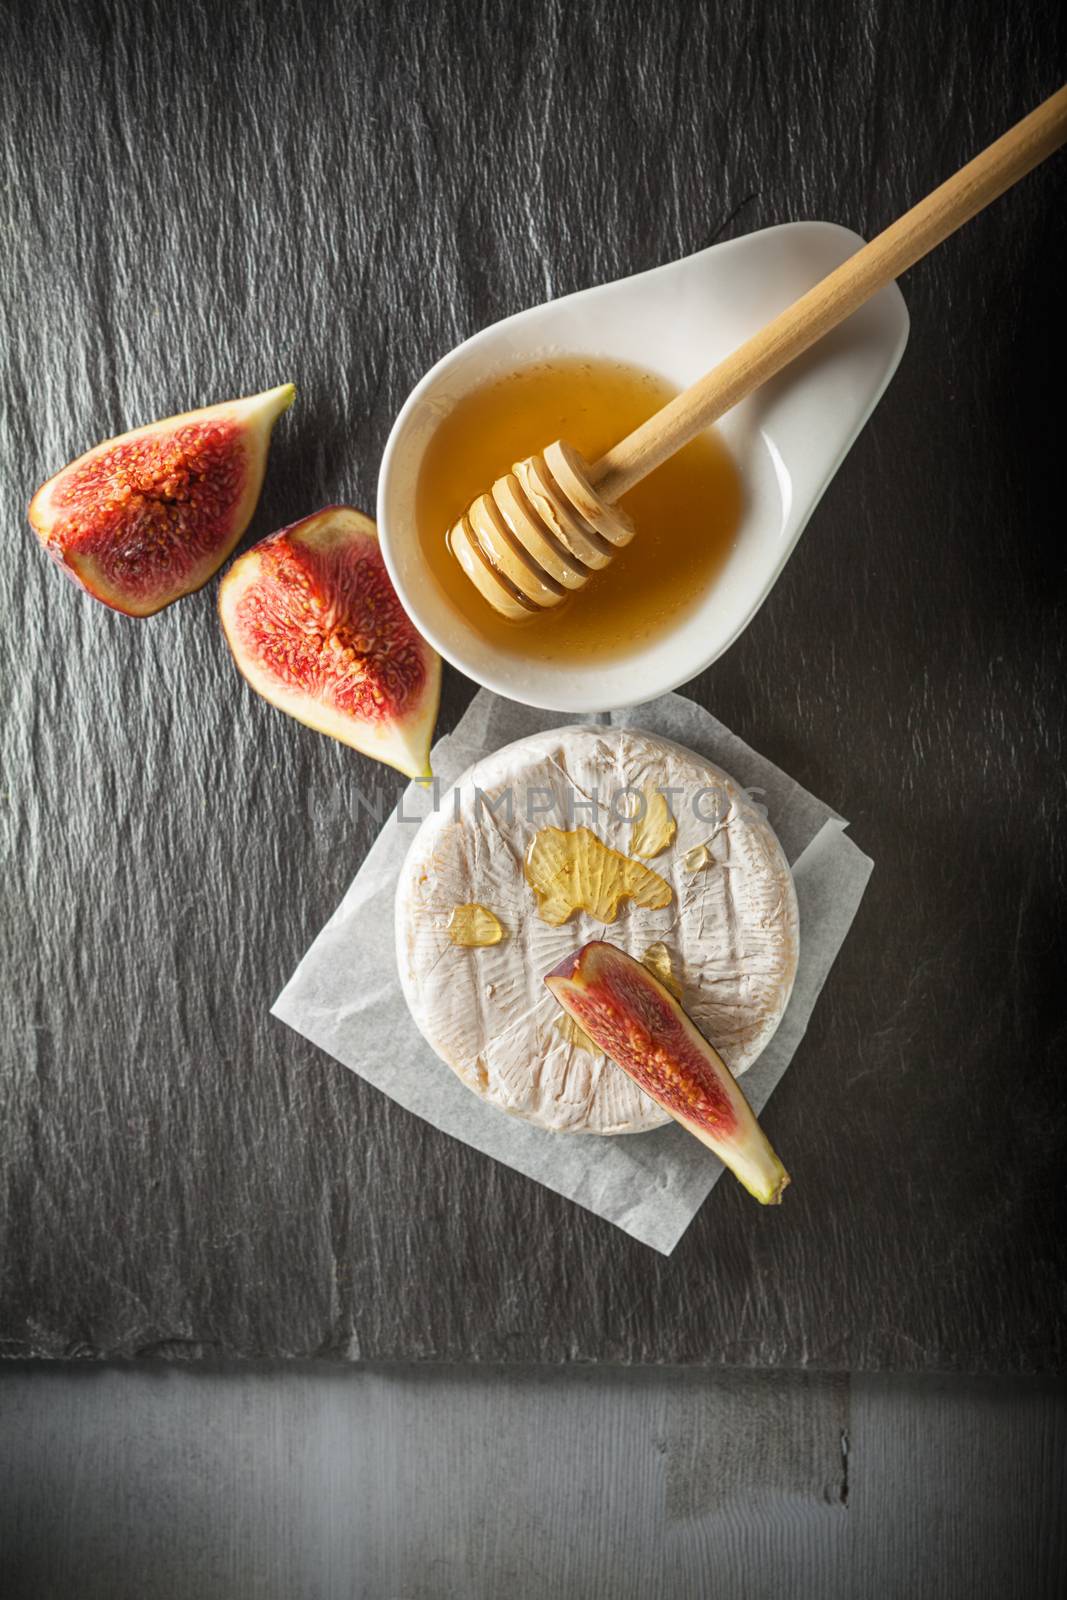 Brie with Figs by supercat67